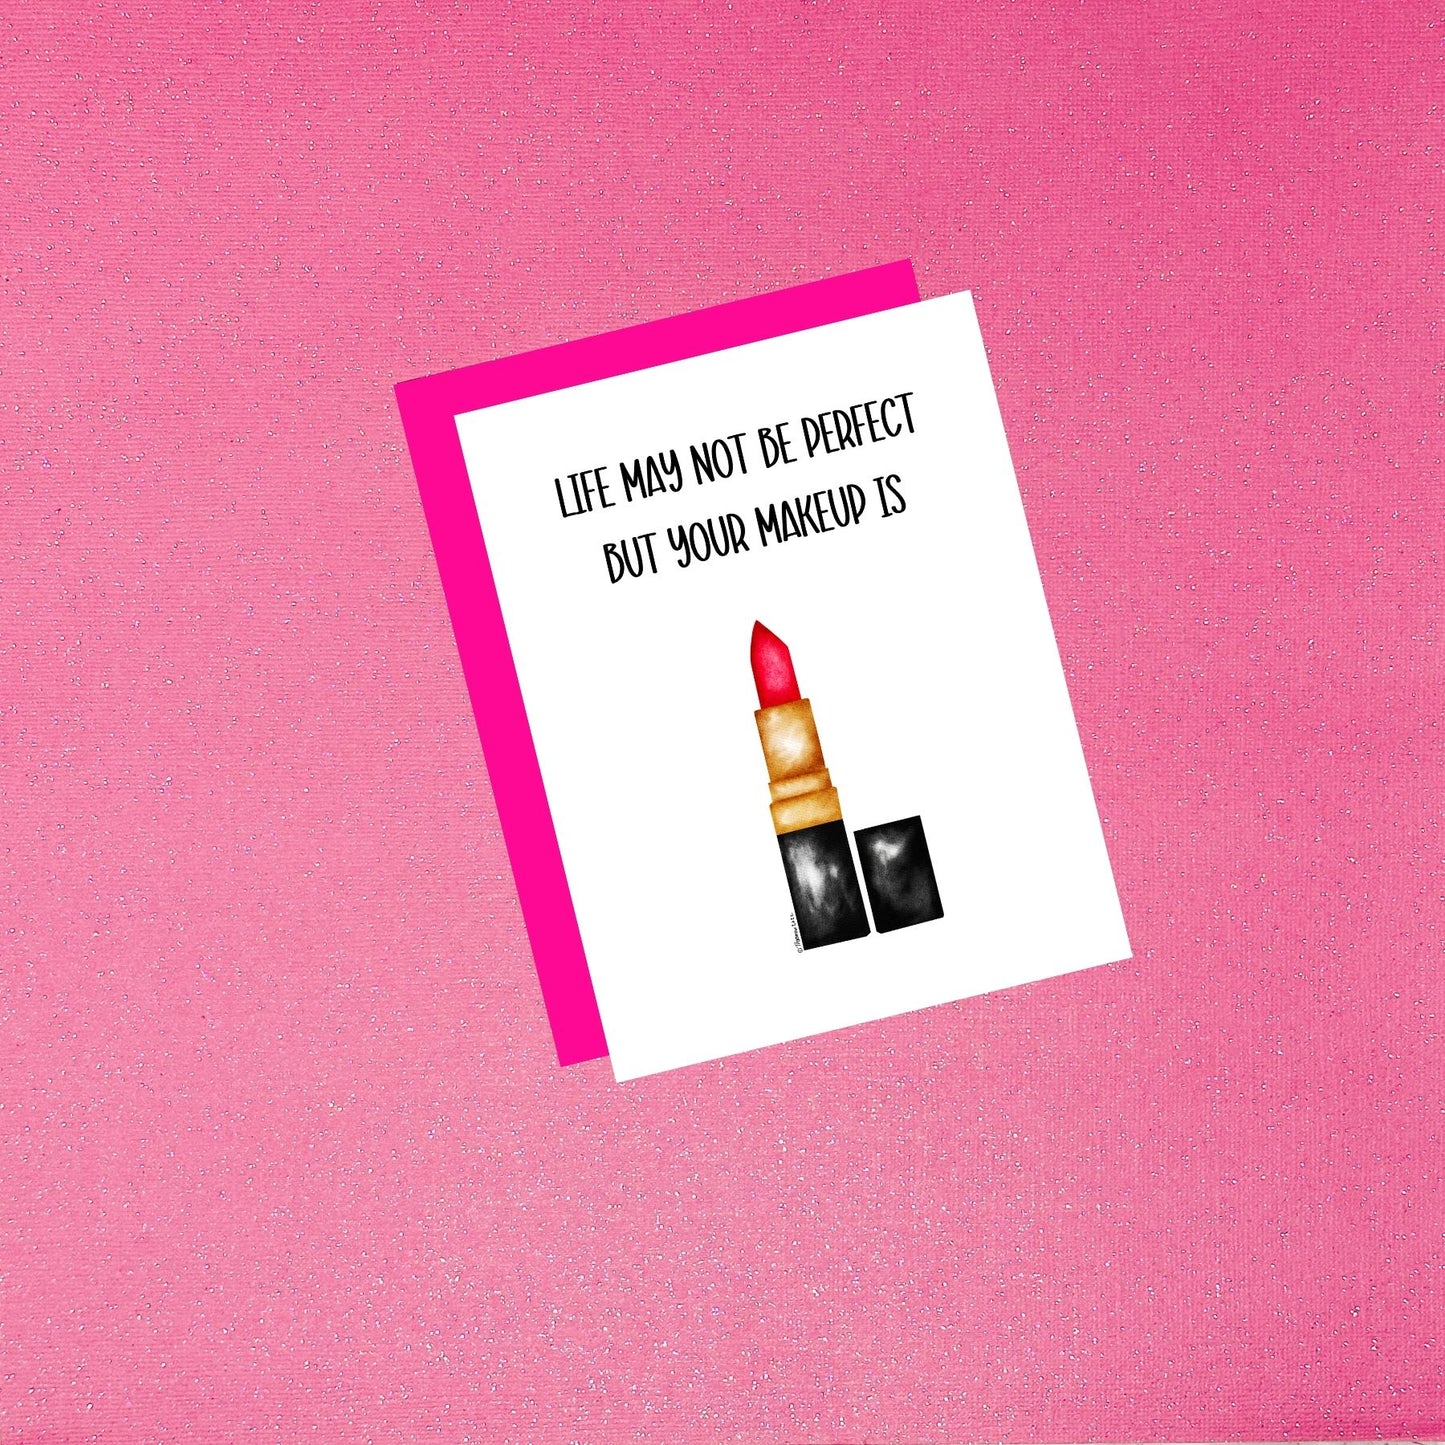 Life May Not Be Perfect But At Least Your Makeup Is - Watercolor Lipstick Empowerment Friendship Greeting Card